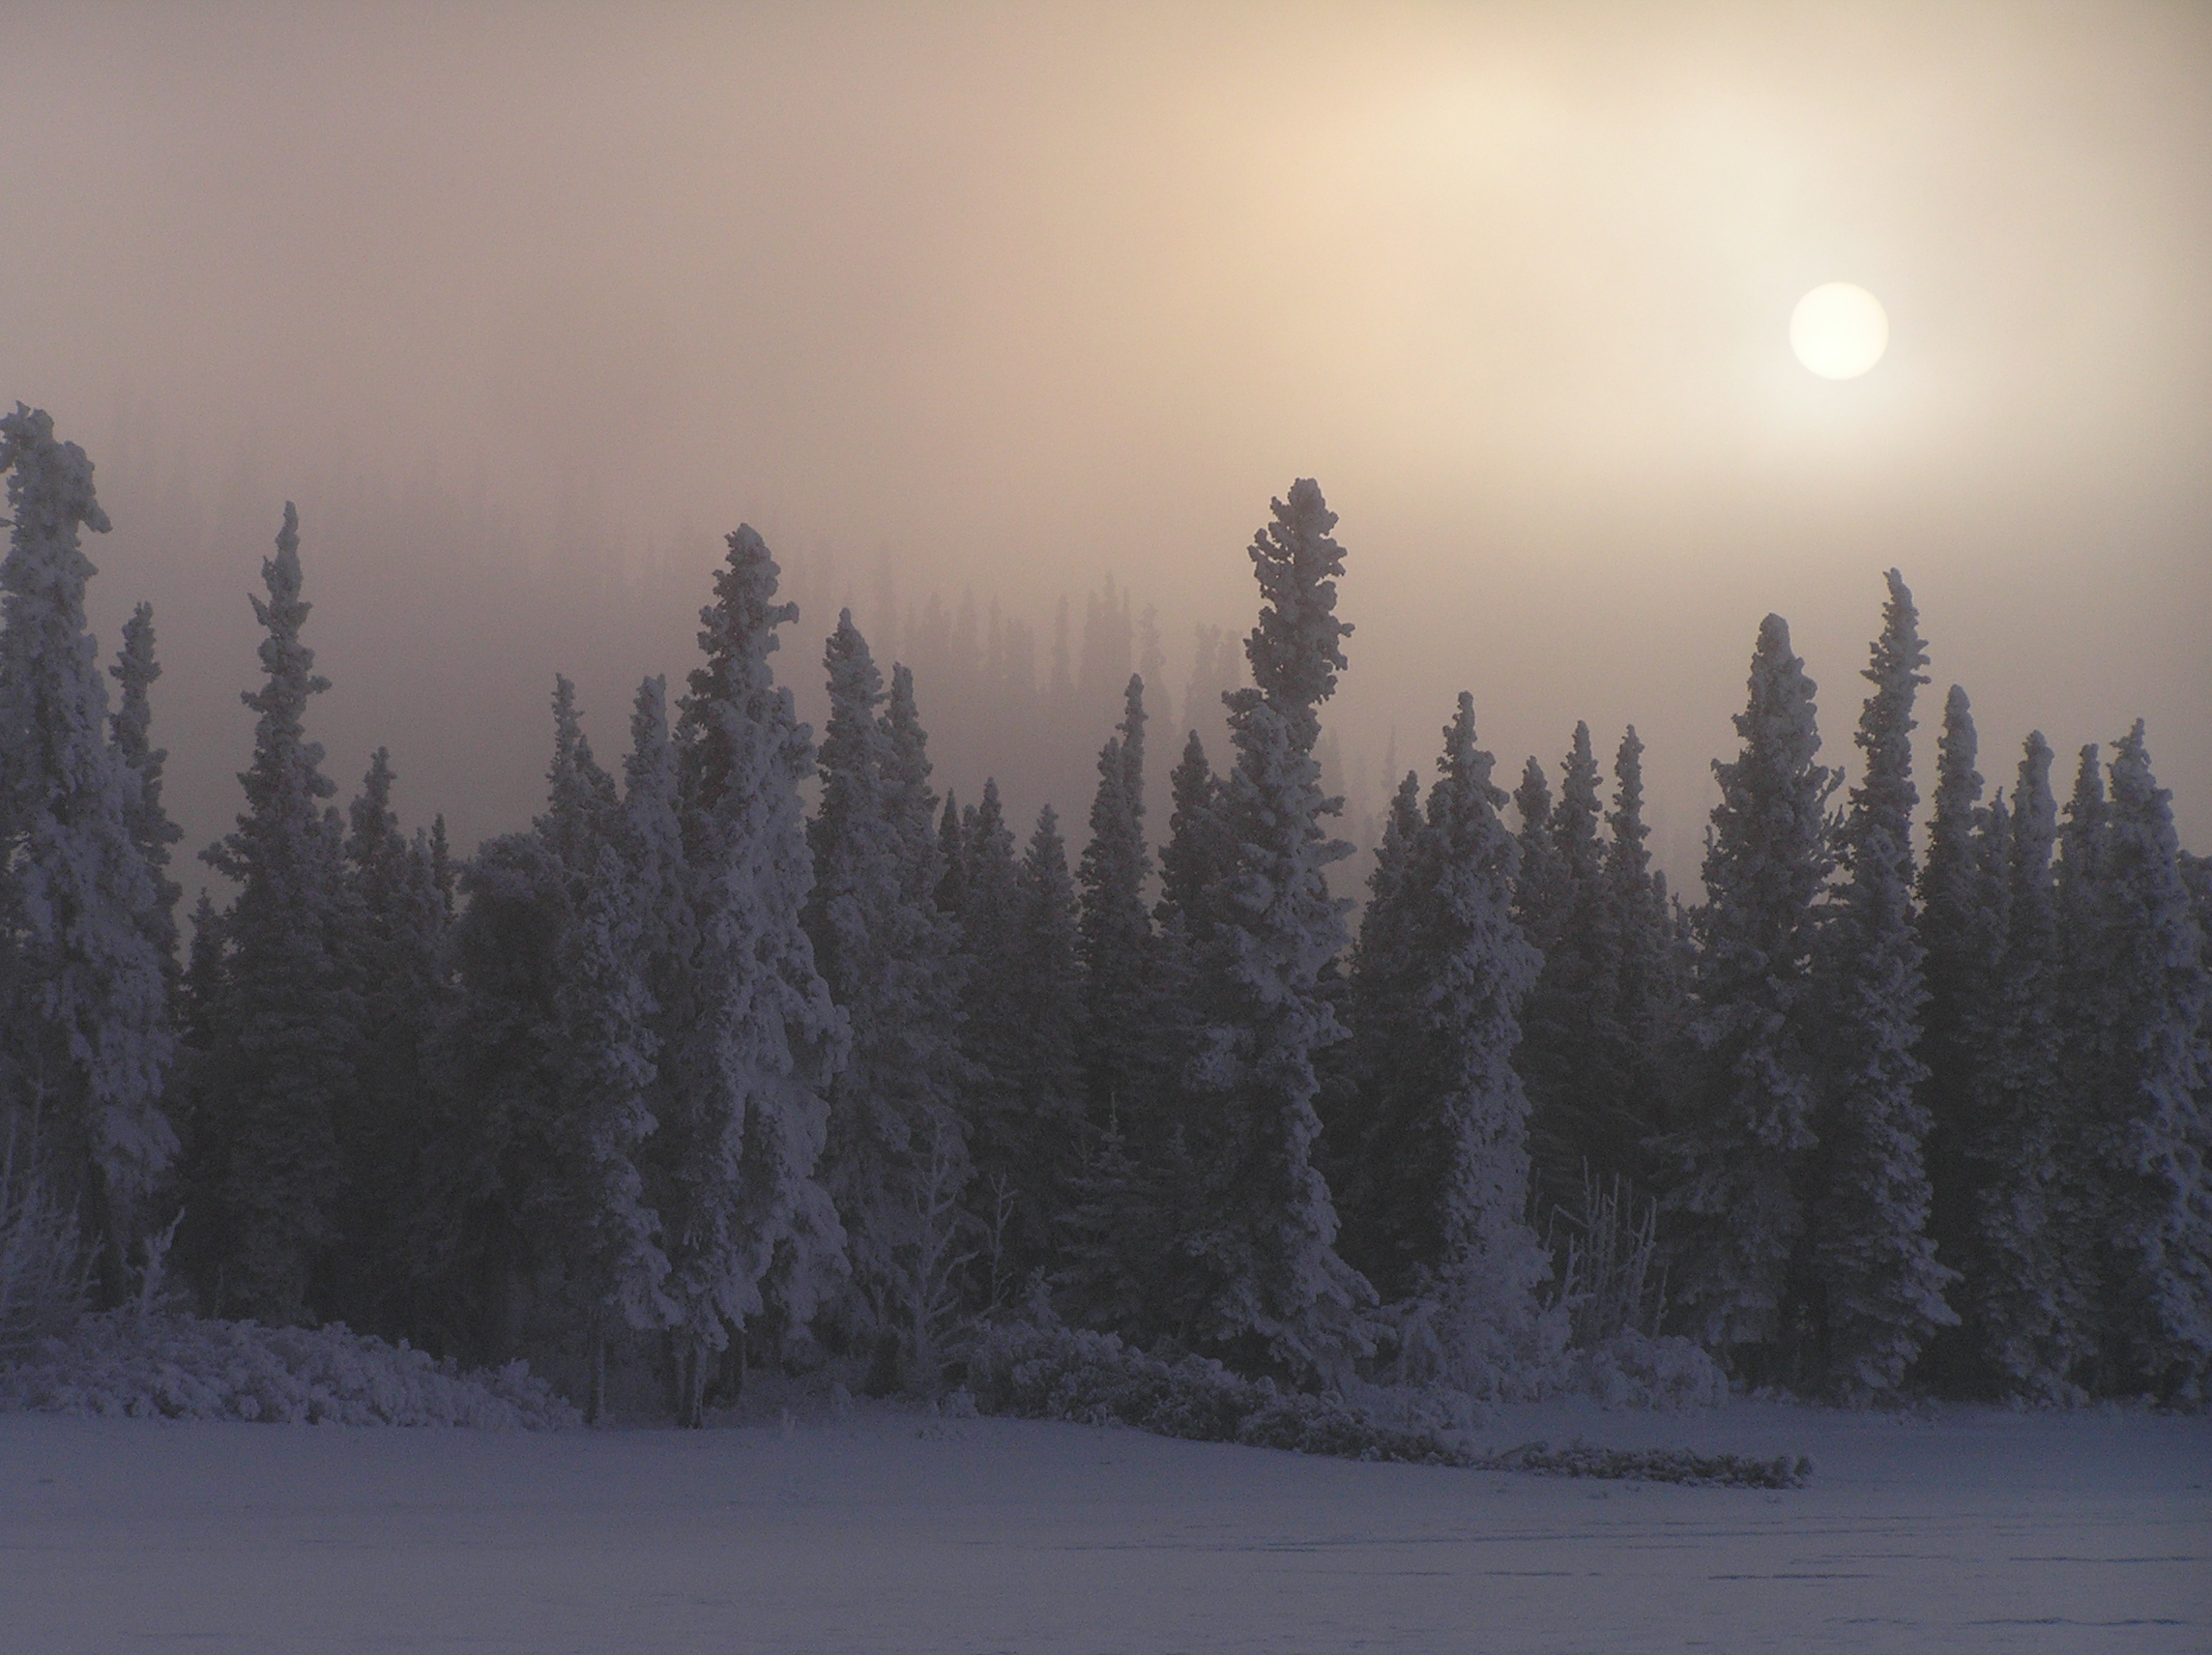 Forest of spruce trees blanketed in snow and fog.